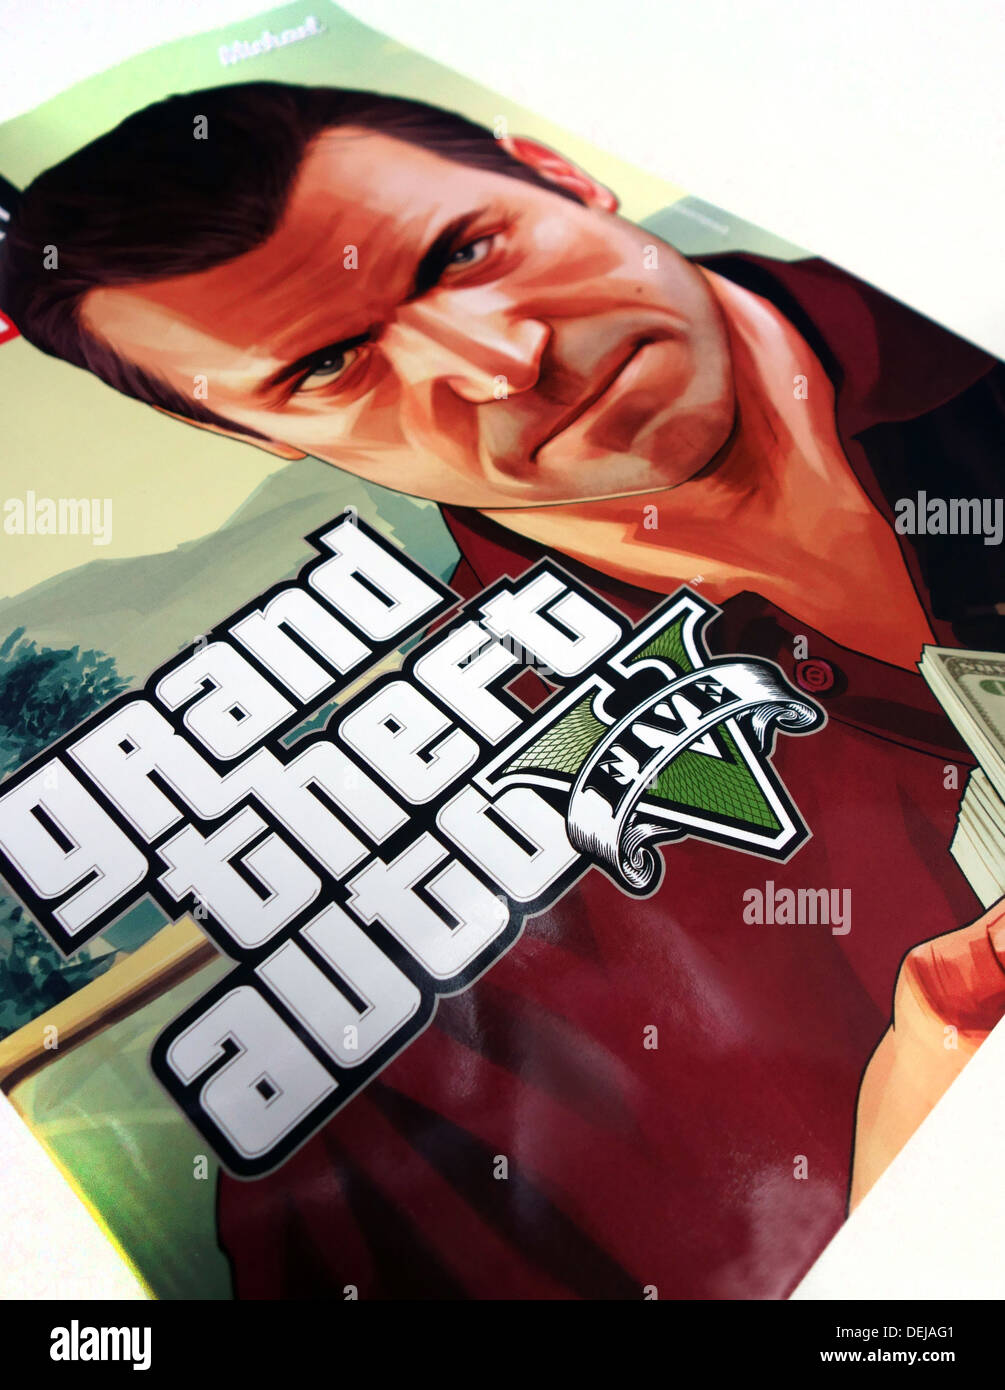 Grand theft auto v Cut Out Stock Images & Pictures - Alamy